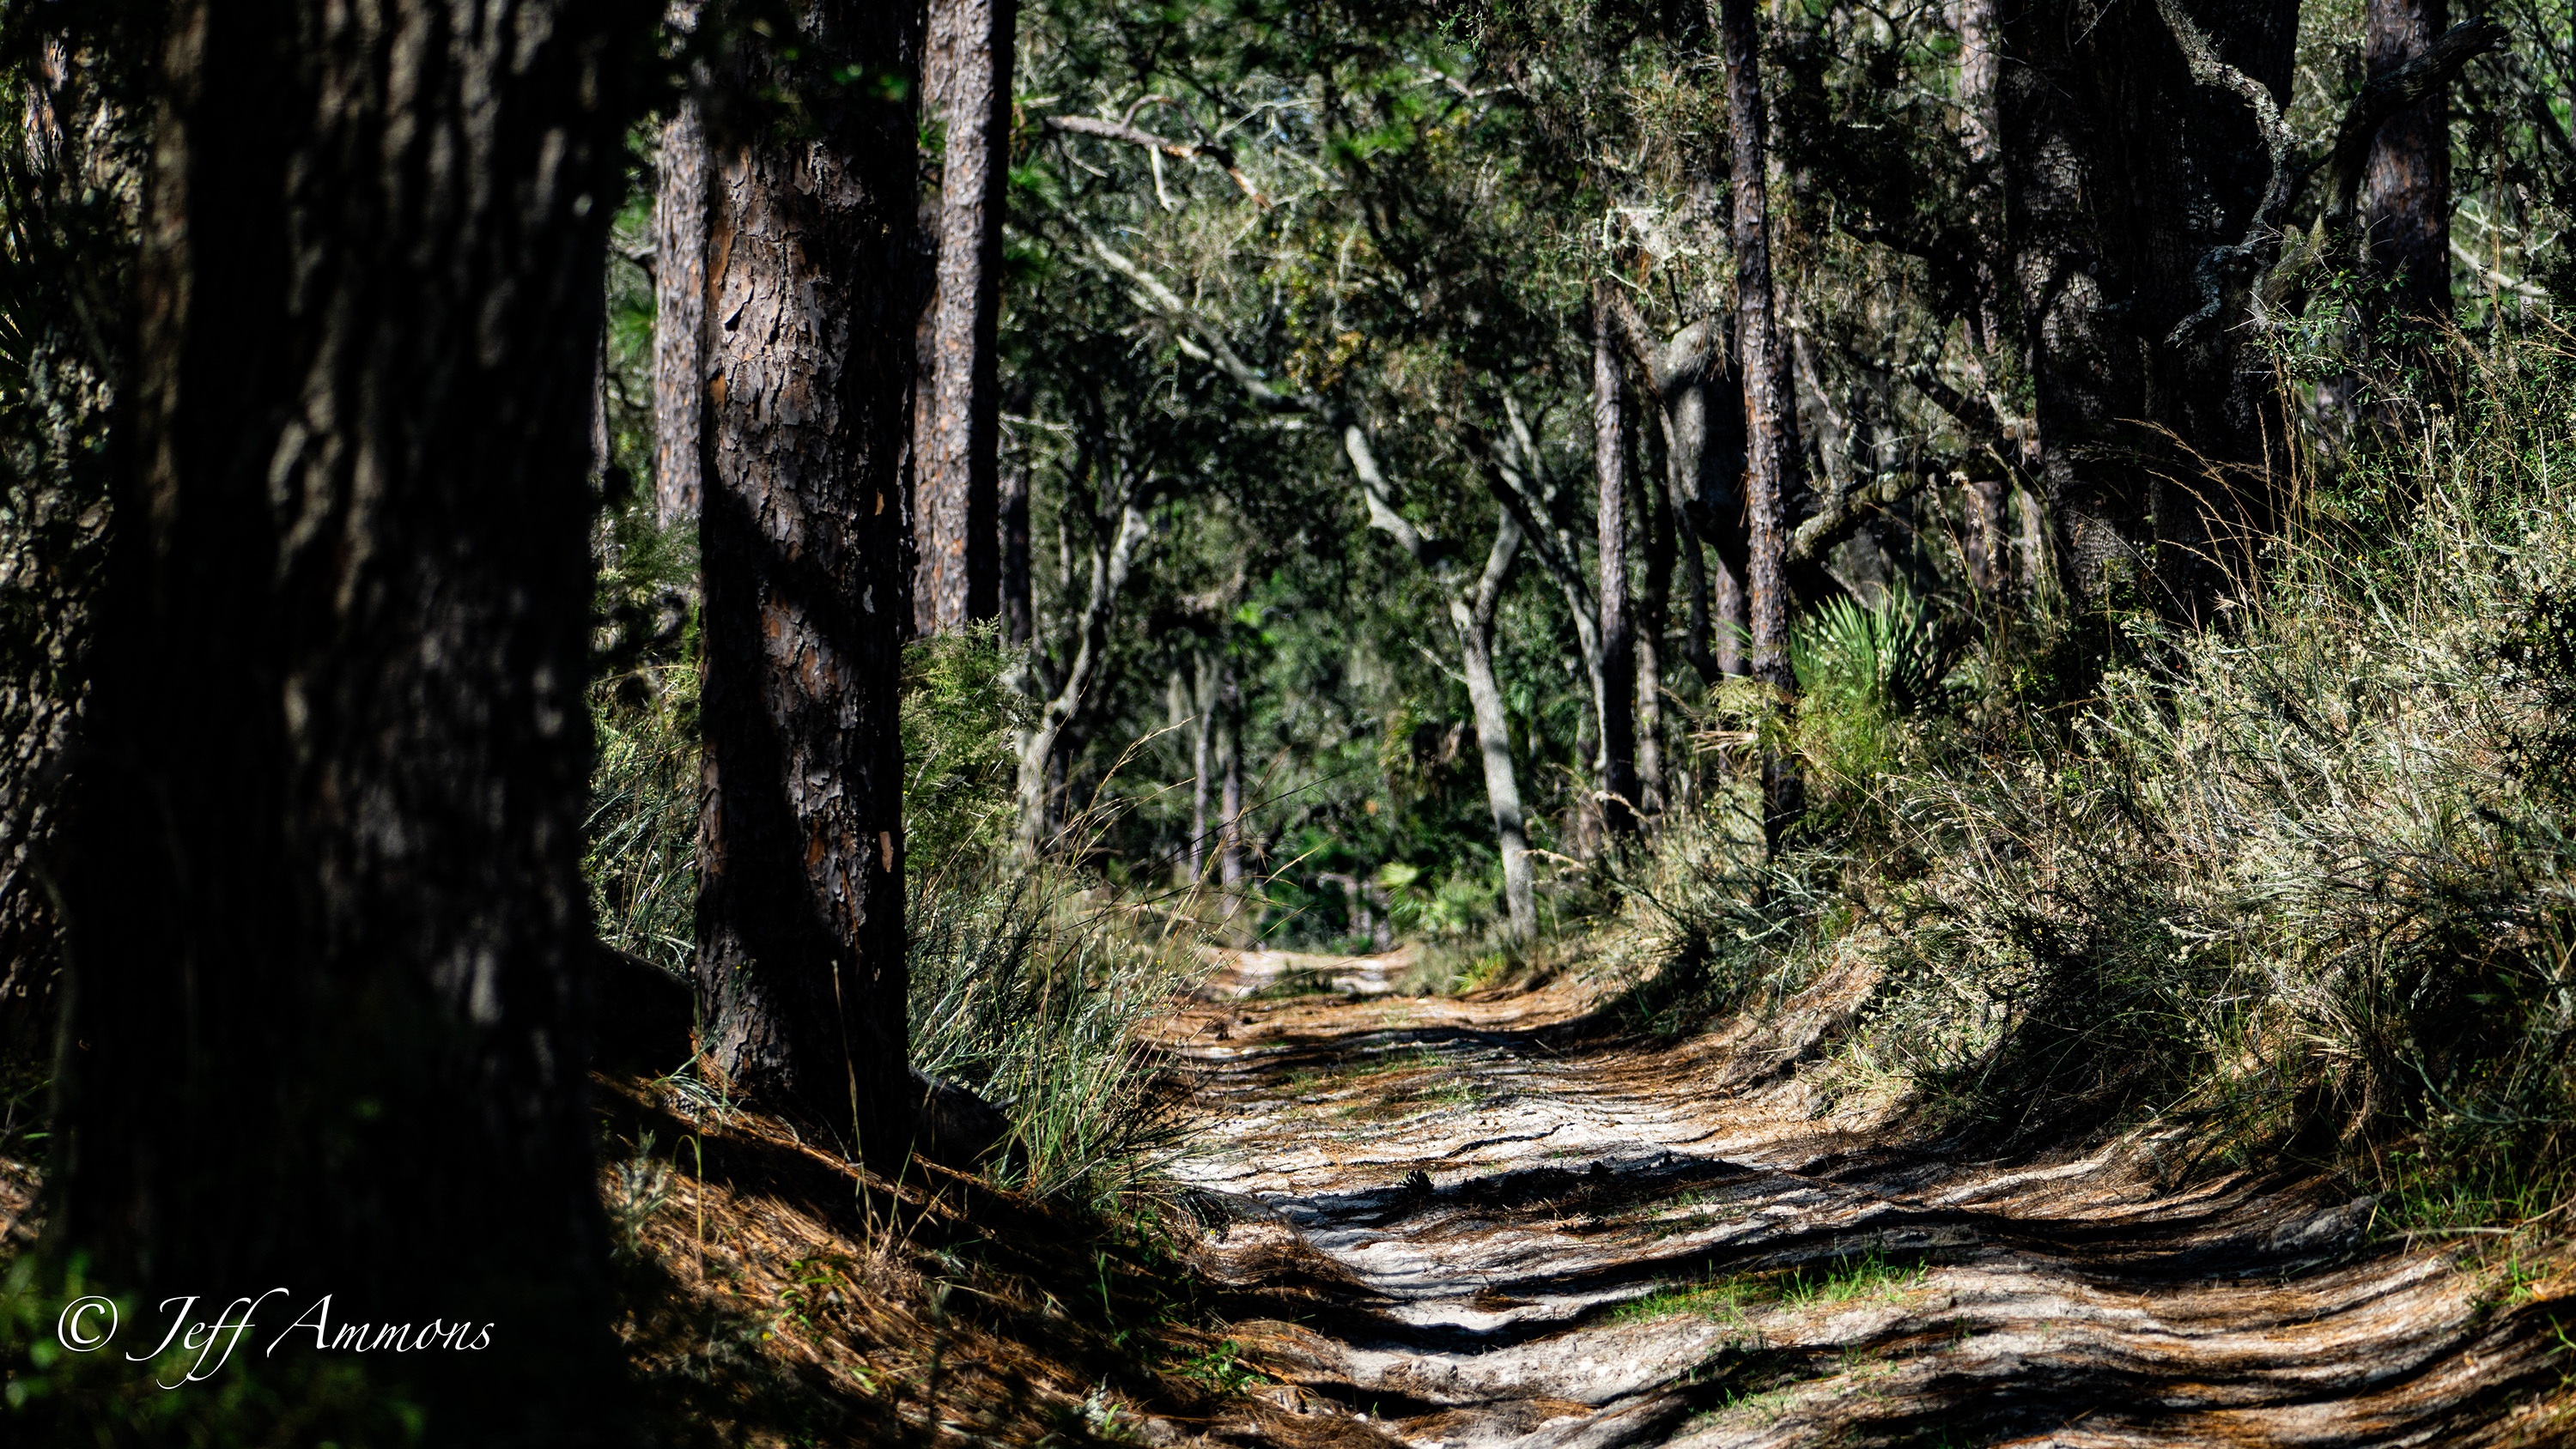 A section of the Volksmarch trail in Wekiwa State Park, Florida